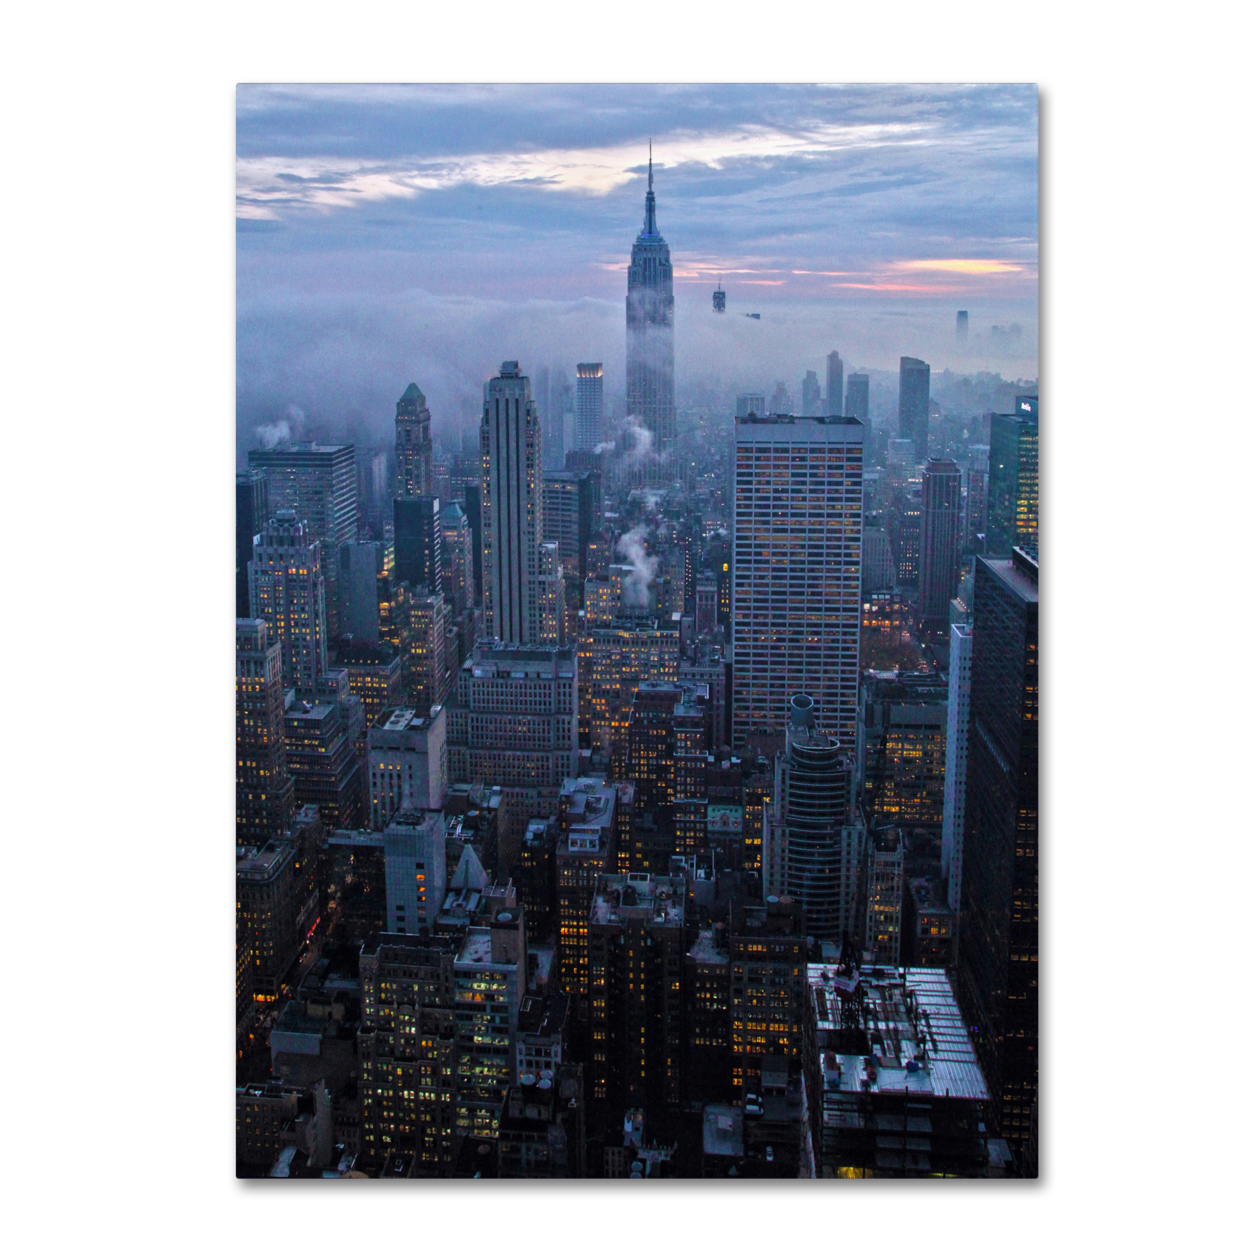 CATeyes 'City Lights' Canvas Wall Art 35 X 47 Inches